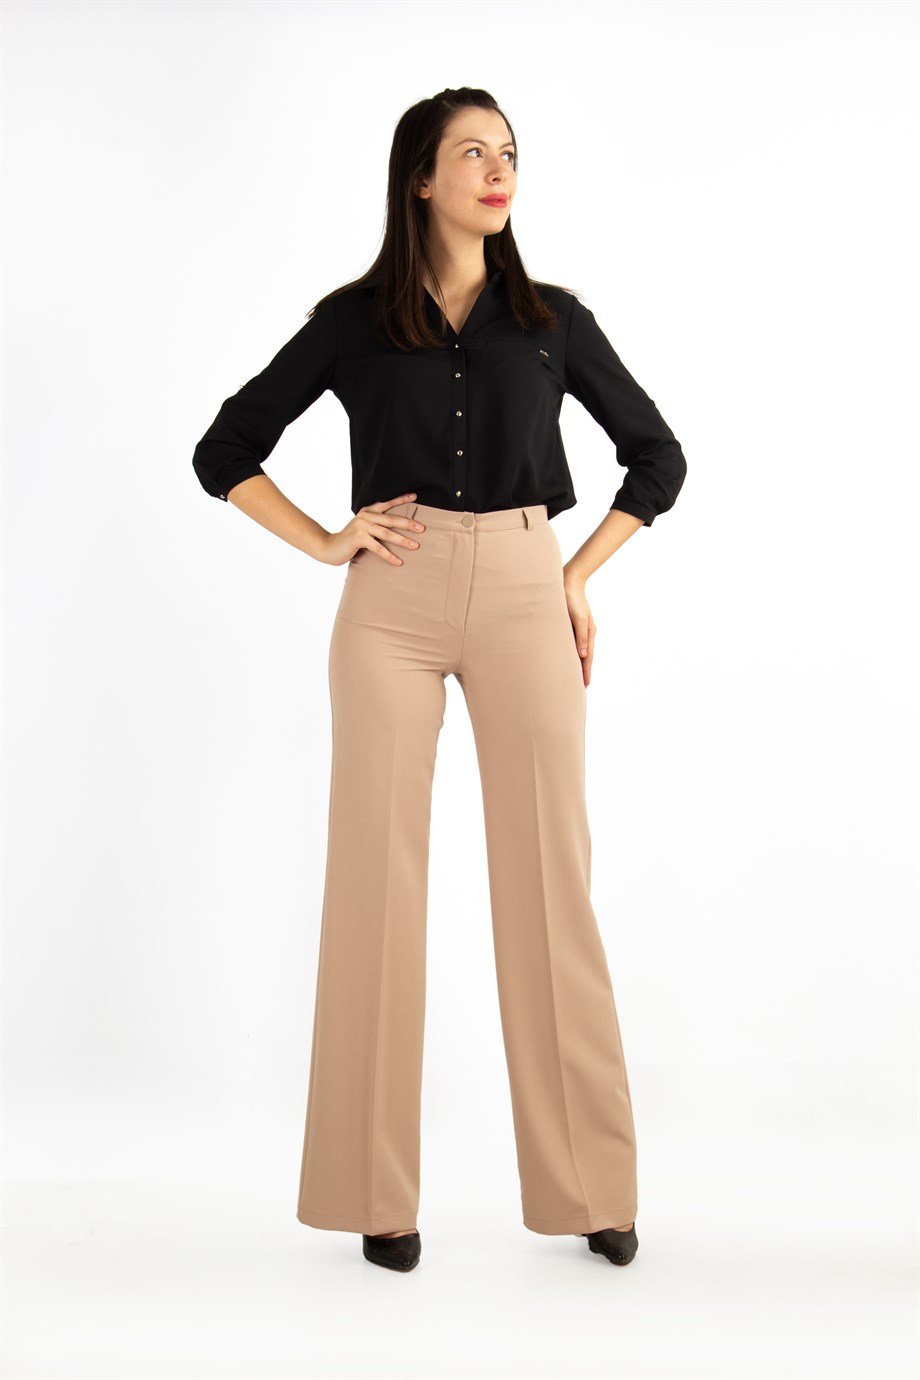 Classic Pants Office Trouser - Beige - Wholesale Womens Clothing